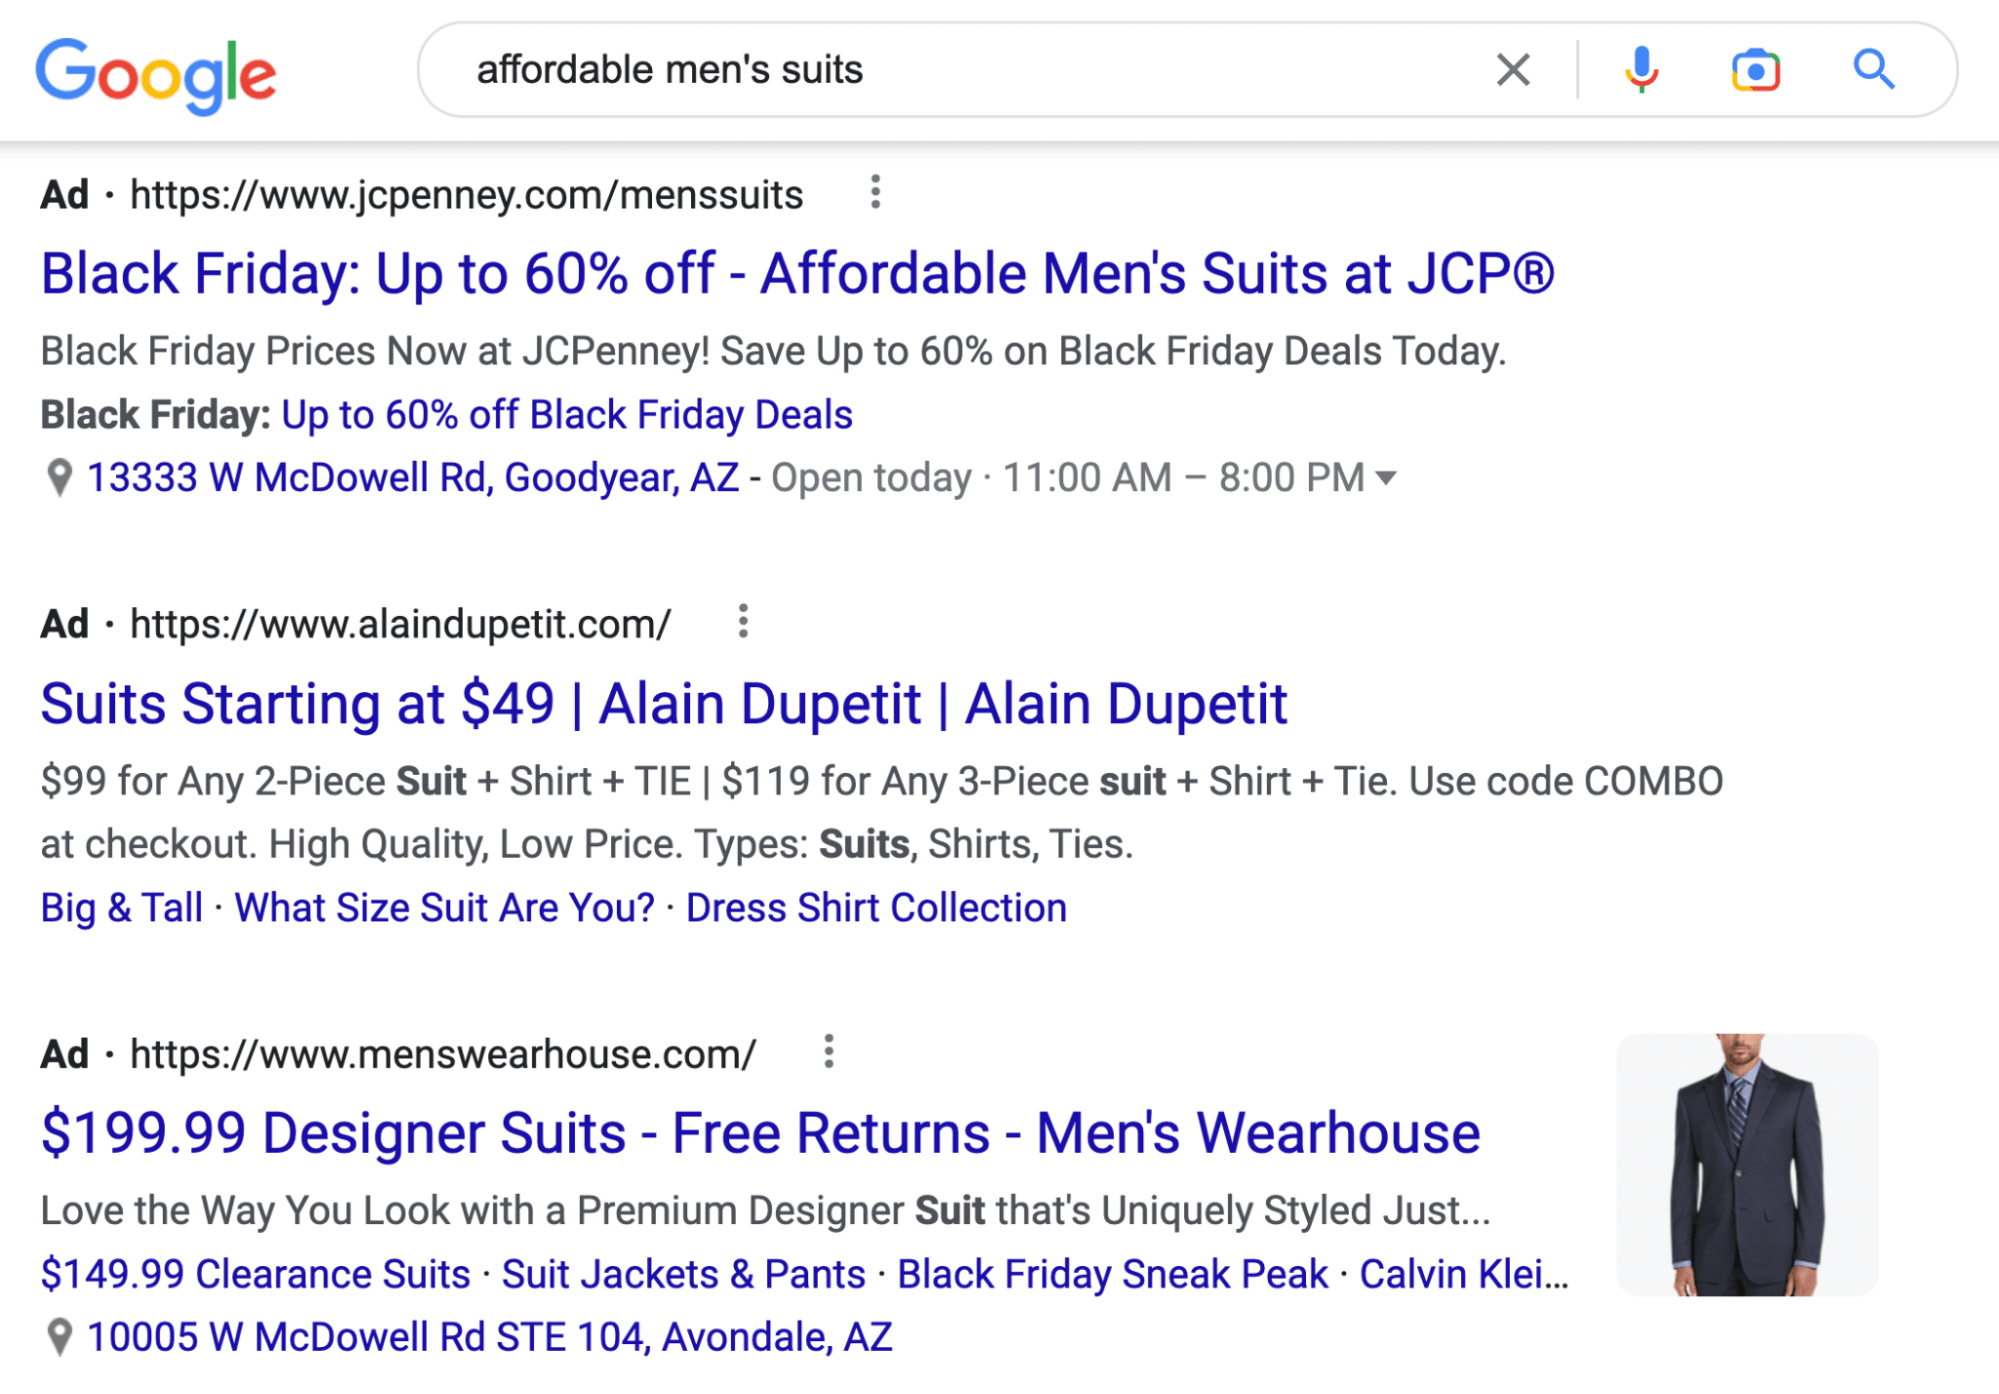 Google search results for "affordable men 's suits"